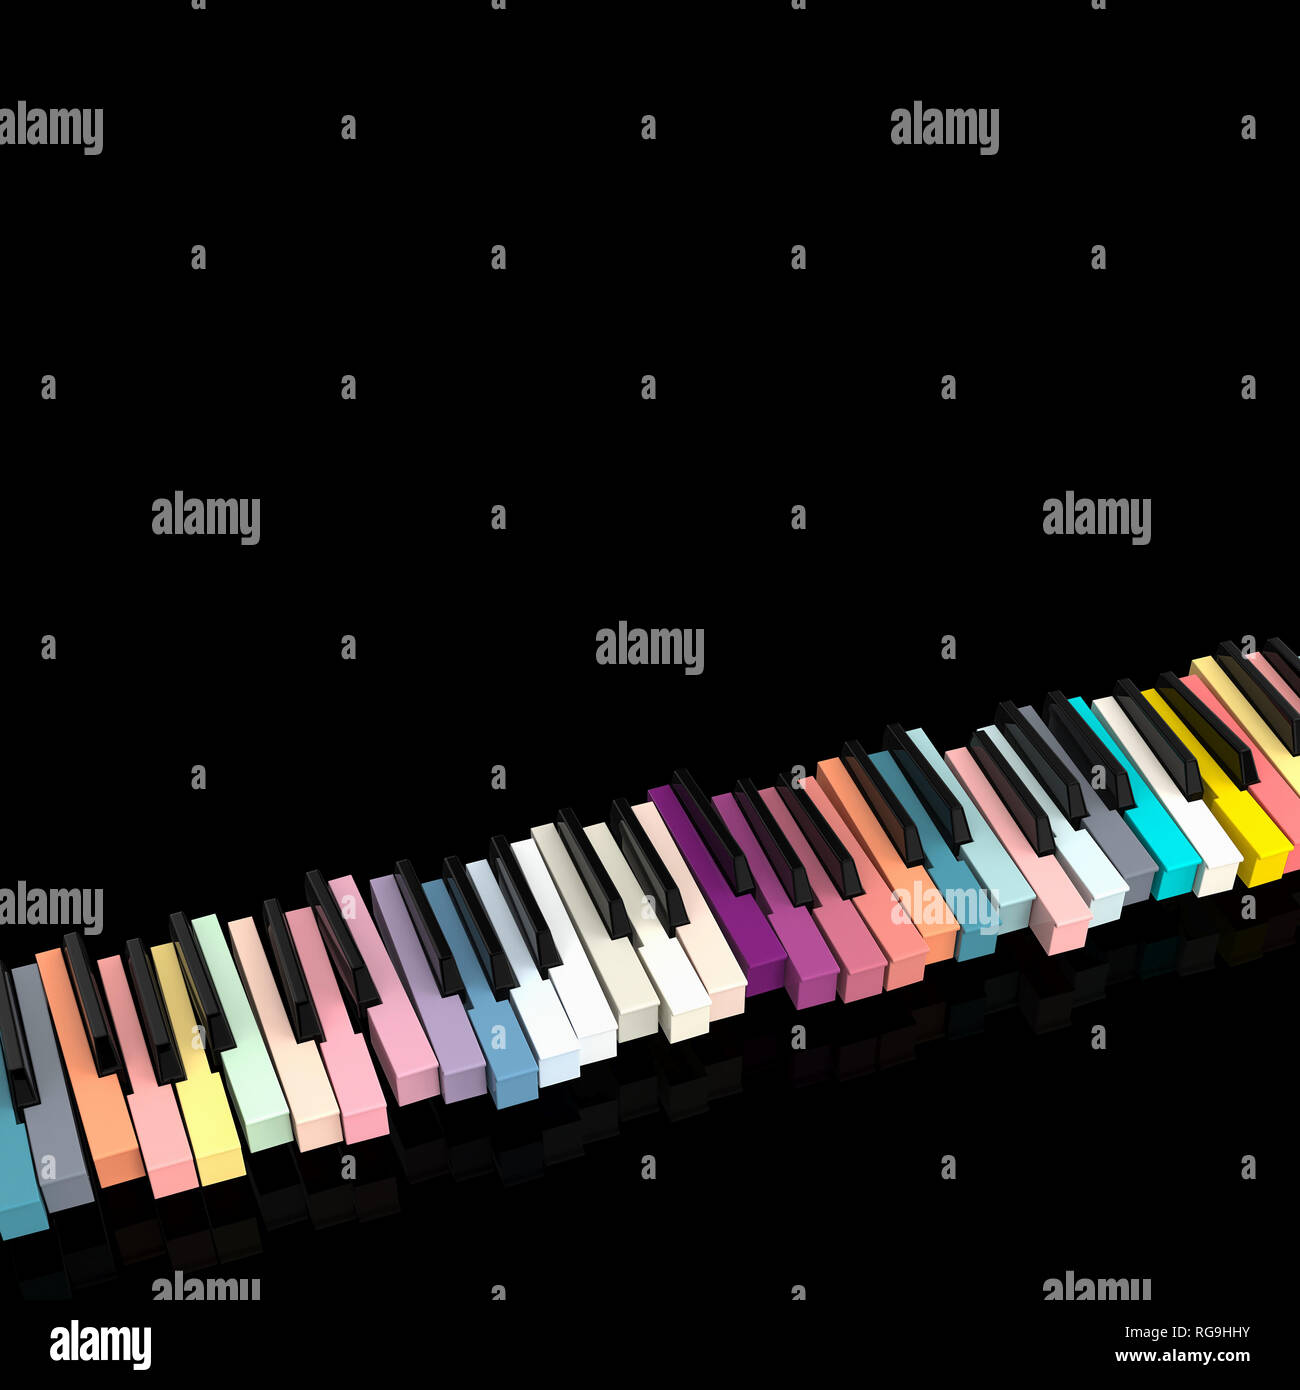 3d rendering image of classic piano keyboard colorful Stock Photo